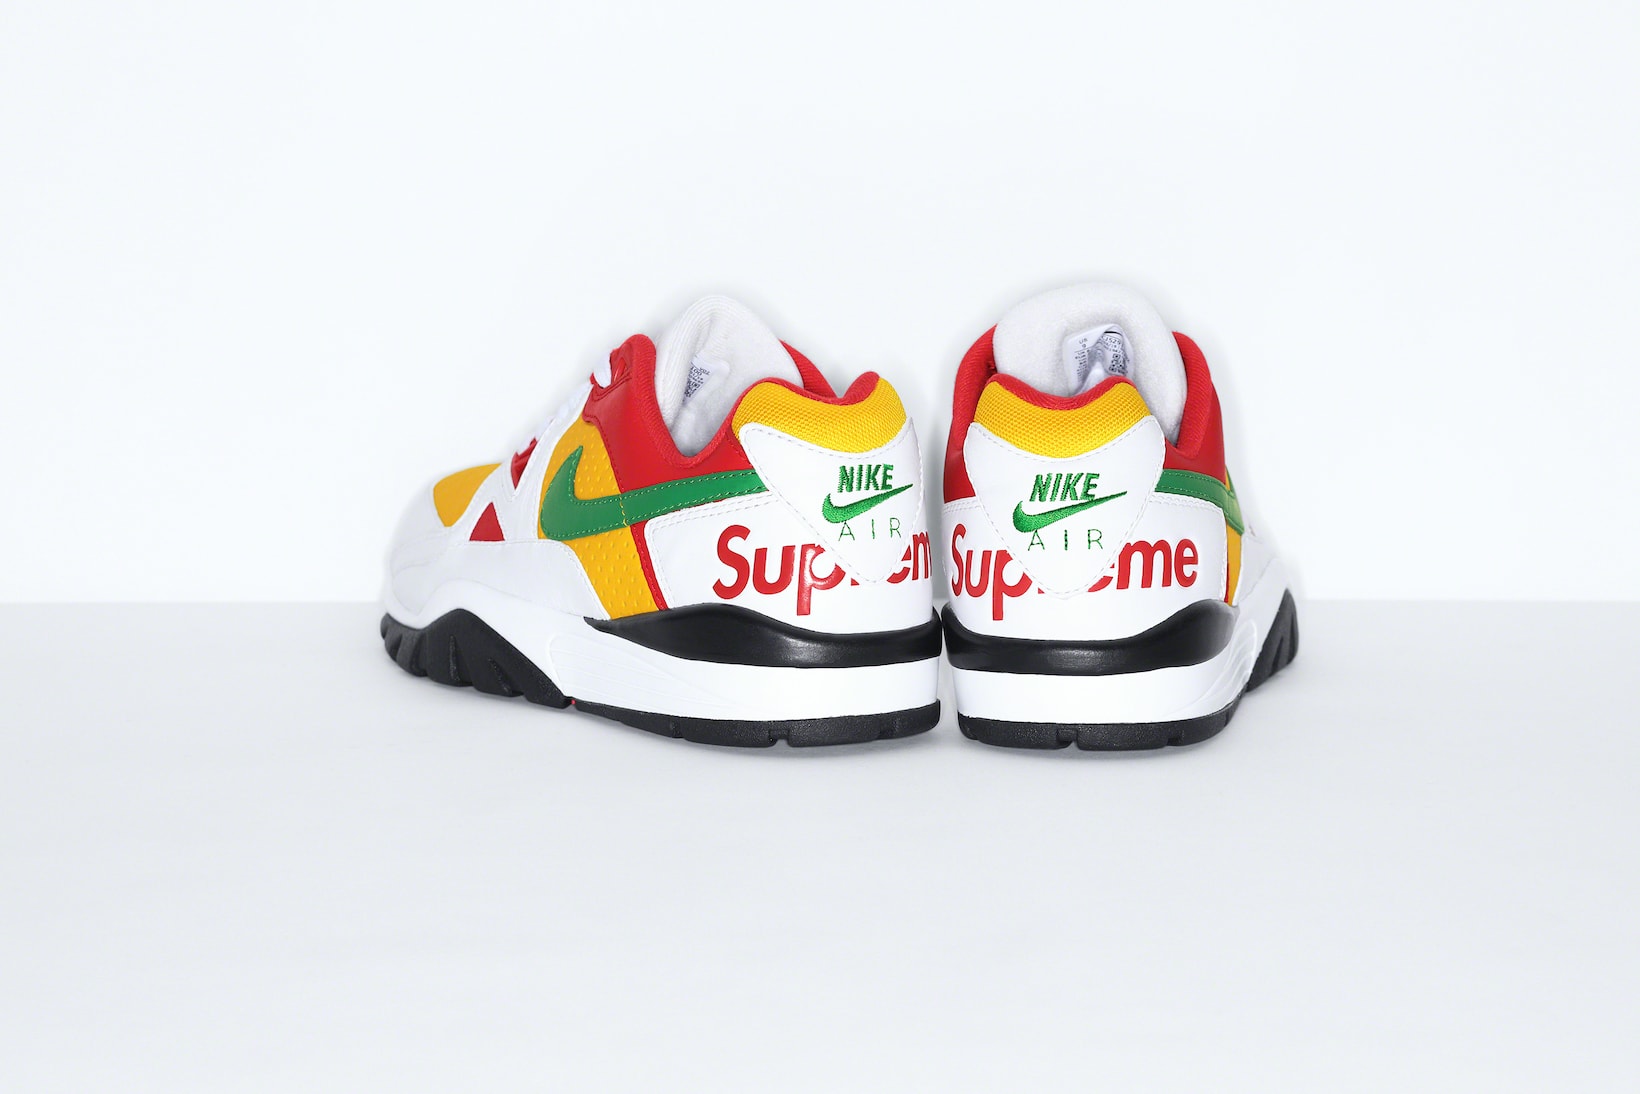 Supreme Nike Cross Trainer Low Sneakers Footwear Shoes Kicks Collaboration Black Red Green White Yellow